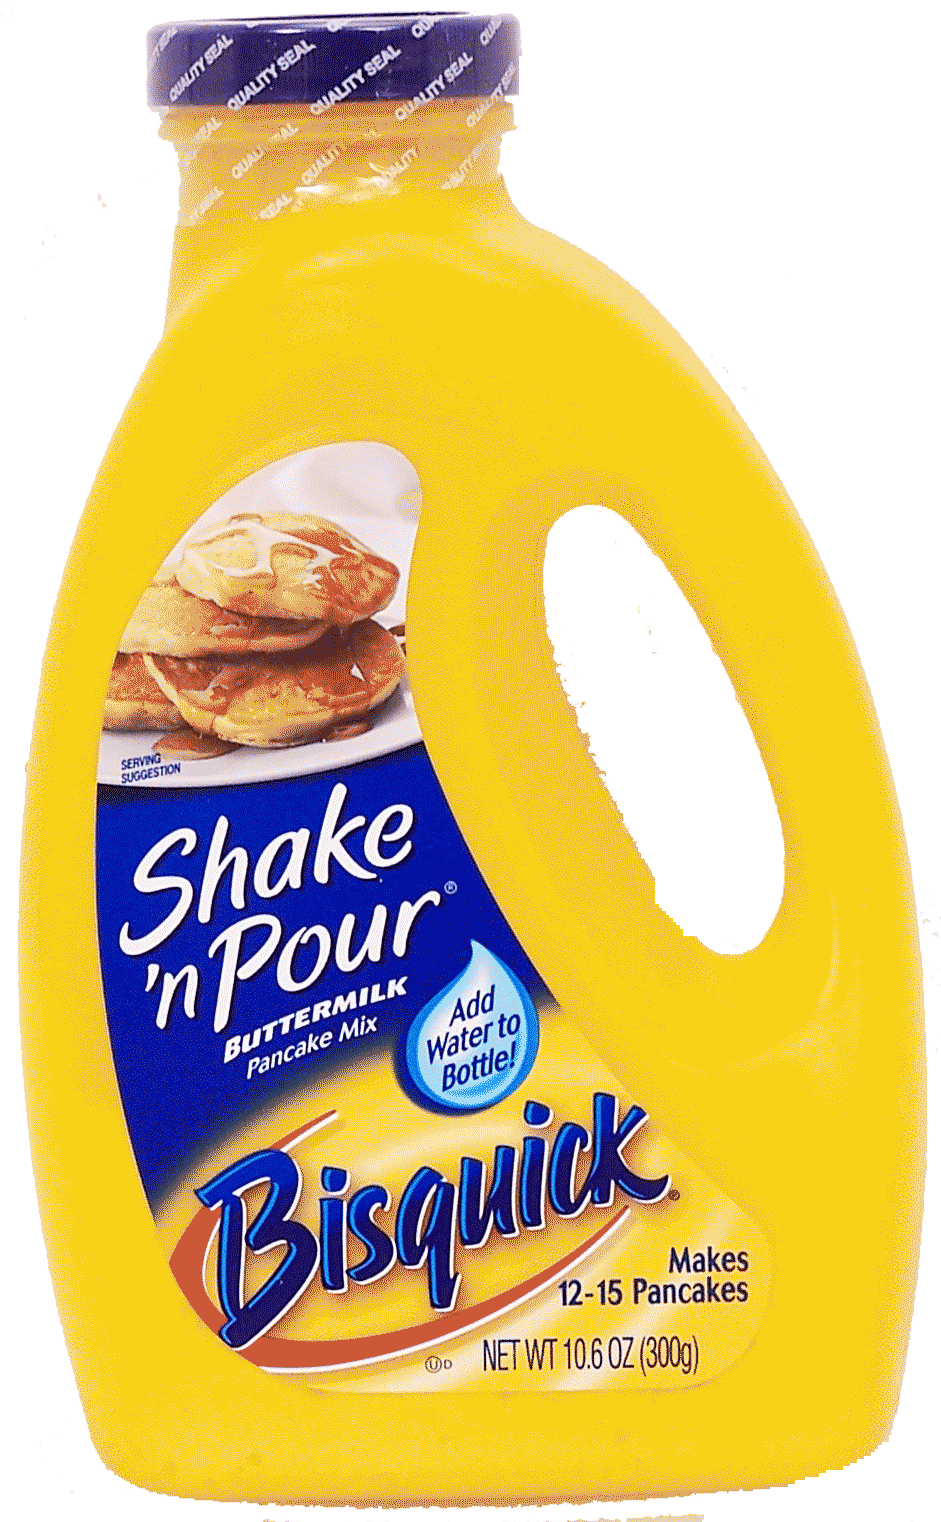 Bisquick Shake 'n Pour buttermilk pancake mix, makes 12-15 pancakes Full-Size Picture